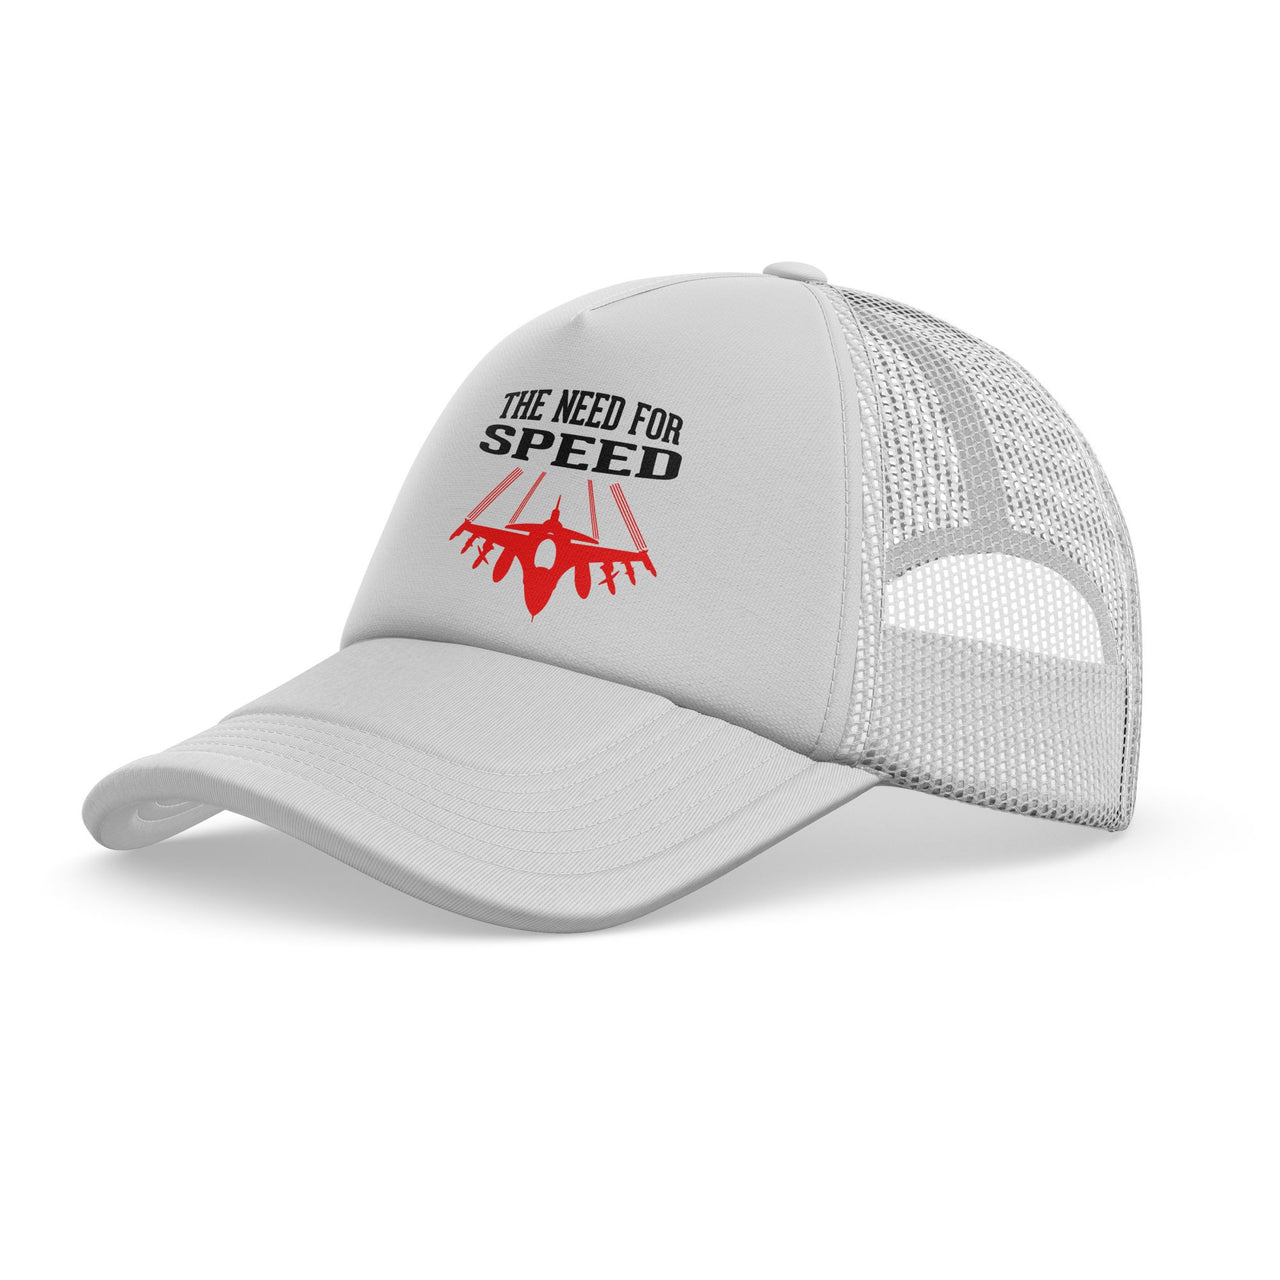 The Need For Speed Designed Trucker Caps & Hats